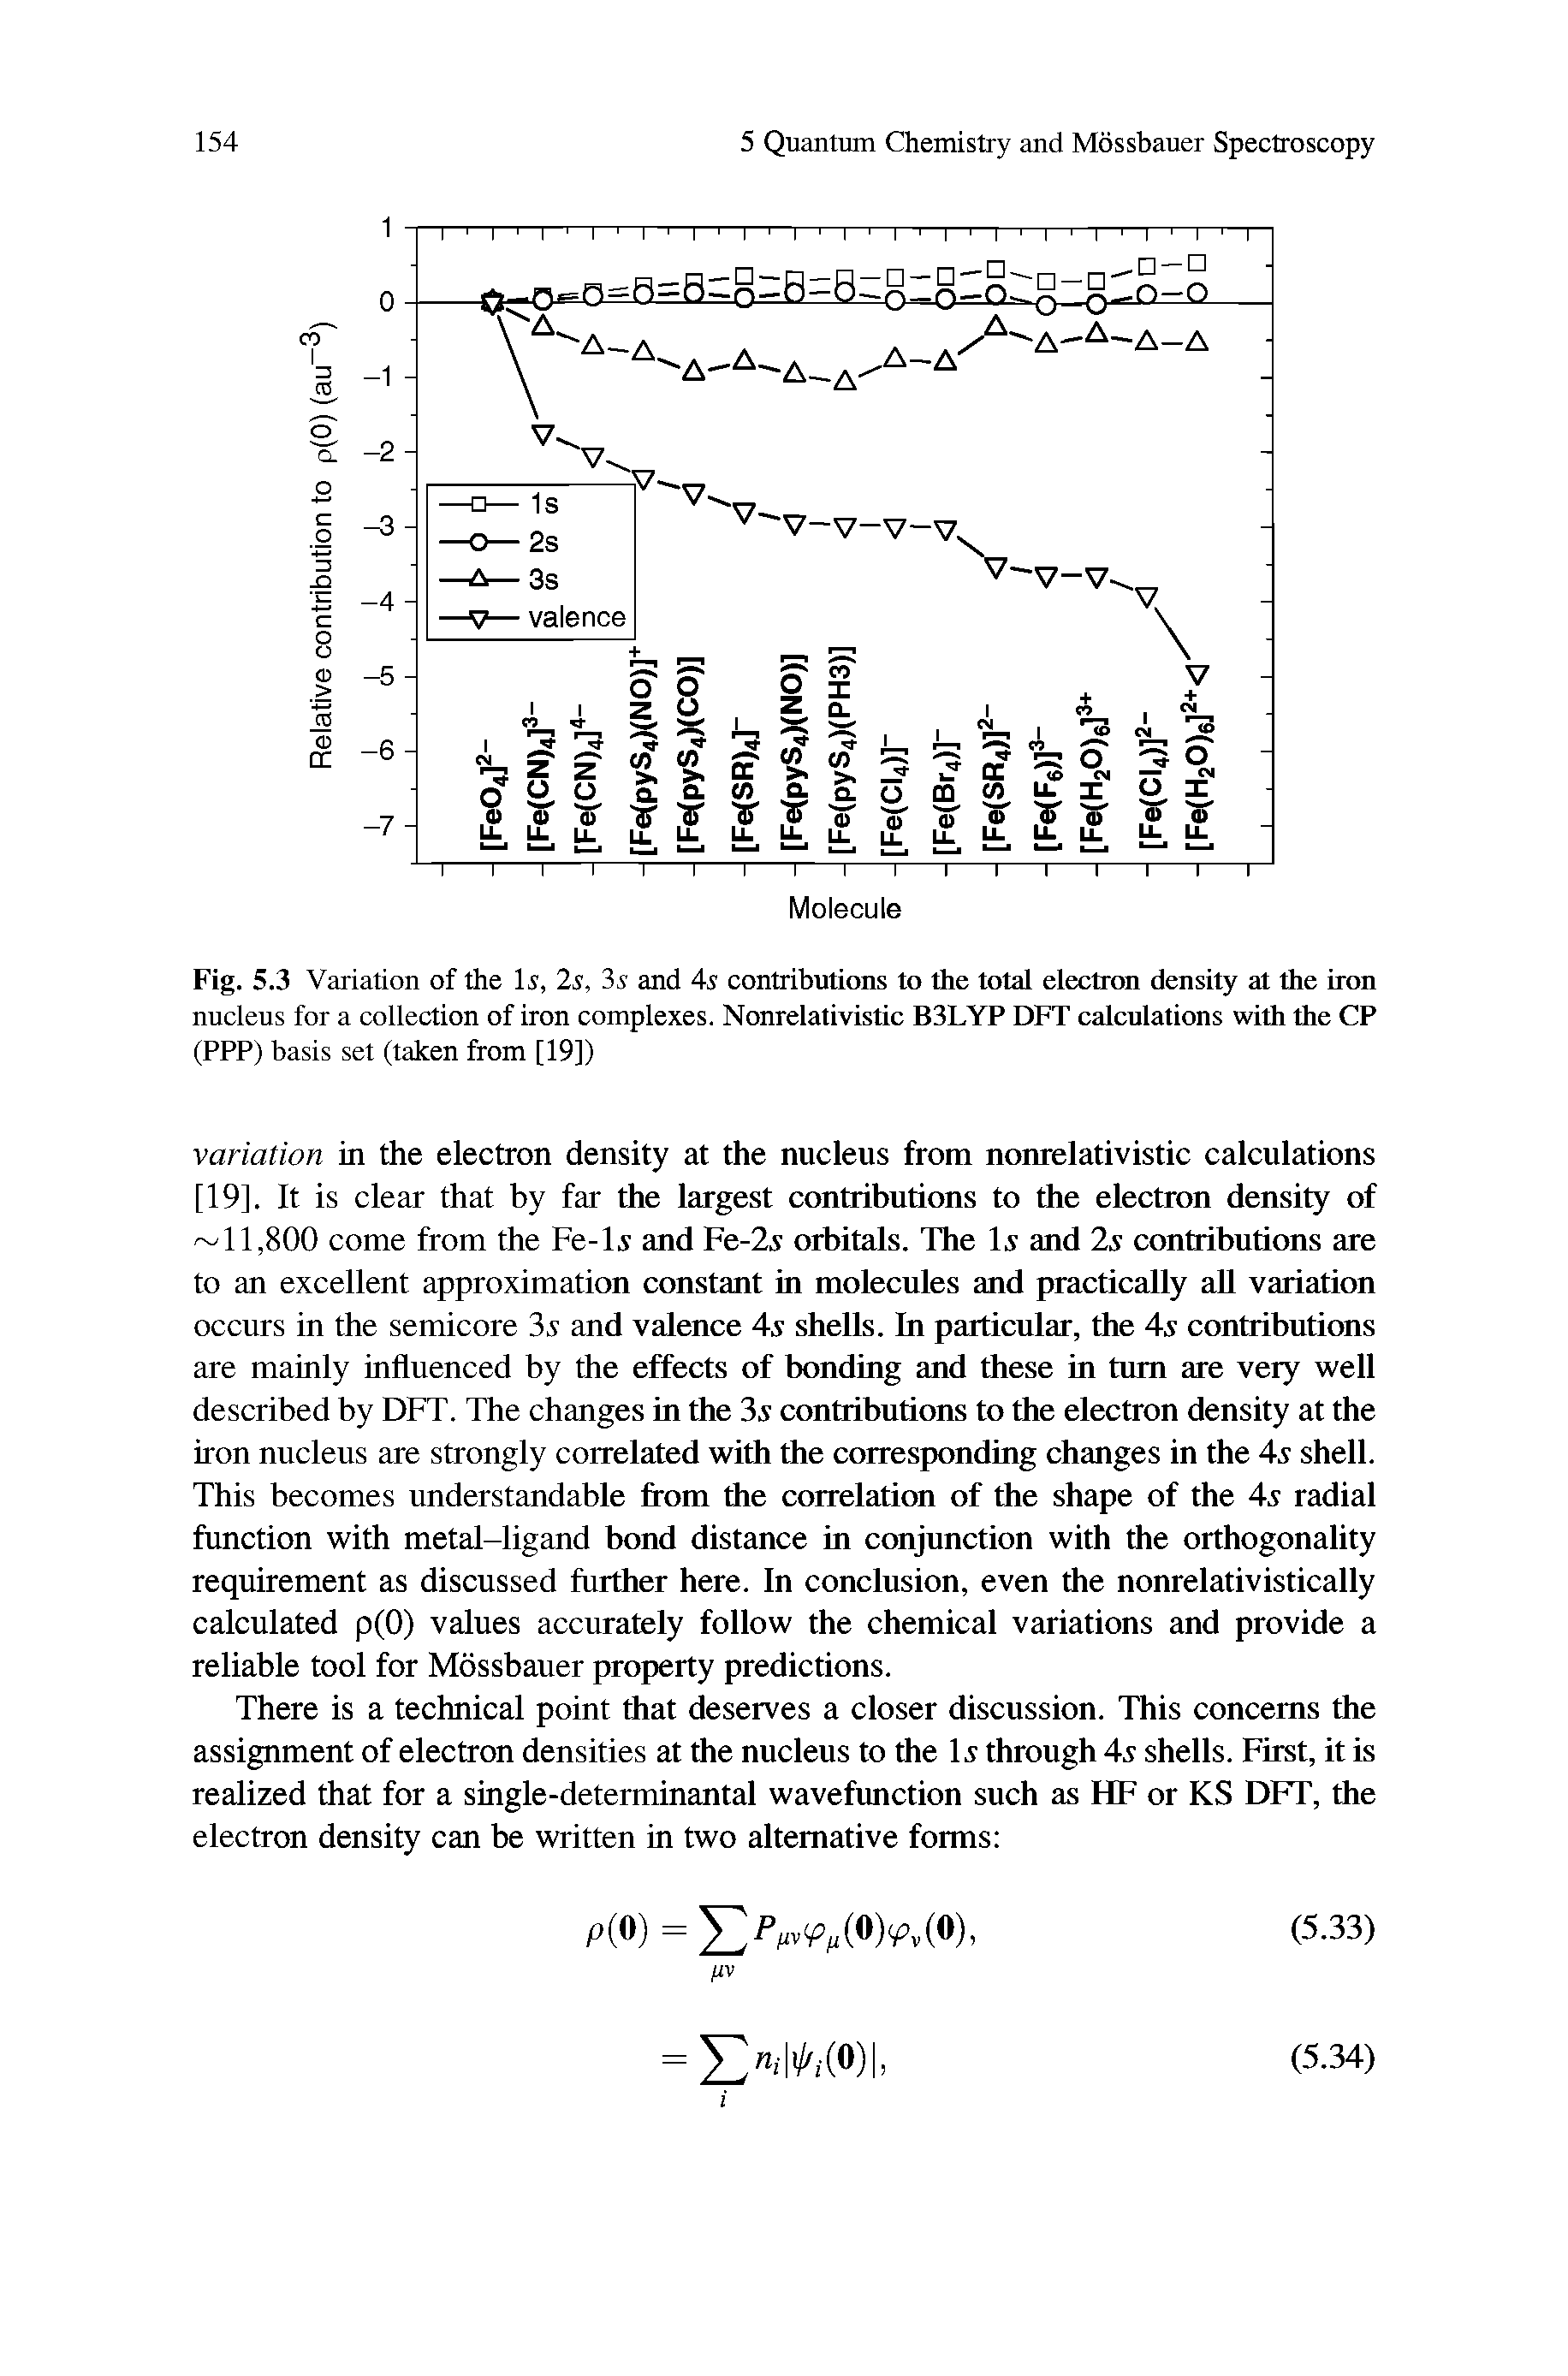 Fig. 5.3 Variation of the li, 2s, 3s and contributions to the total electron density at the iron nucleus for a collection of iron complexes. Nonrelativistic B3LYP DFT calculations with the CP (PPP) basis set (taken from [19])...